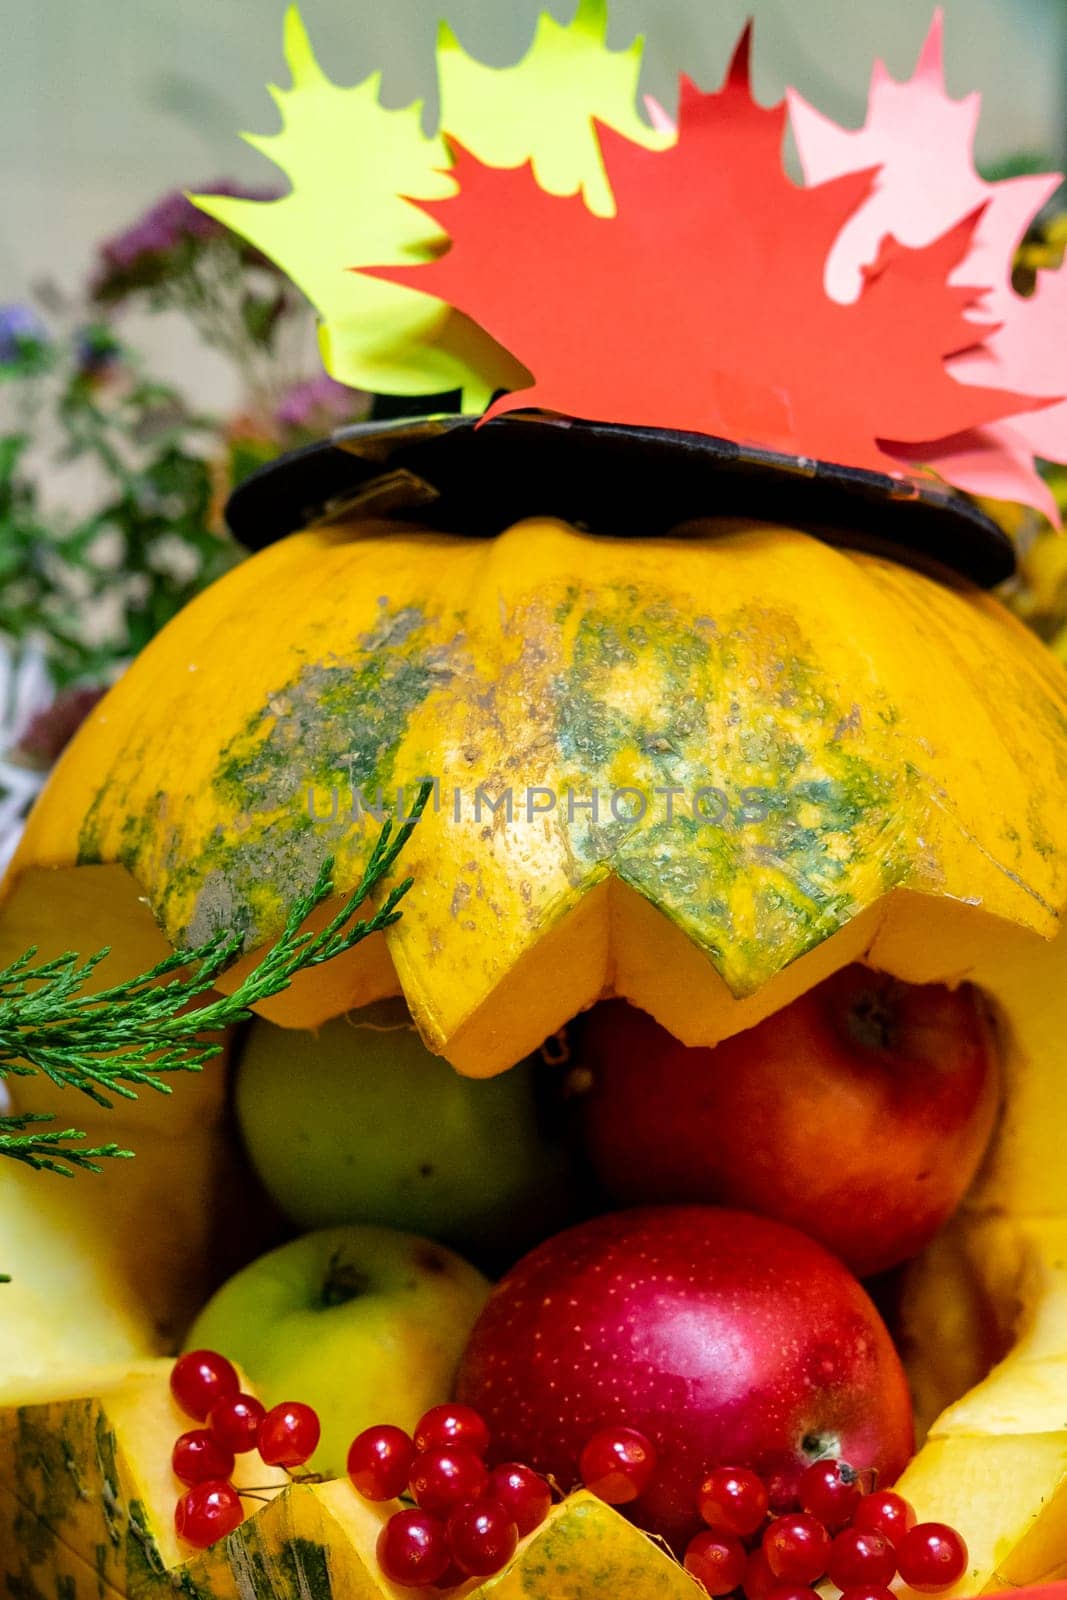 Decoration for Halloween. Autumn holiday. Halloween celebration. Pumpkin ate fruits and berries